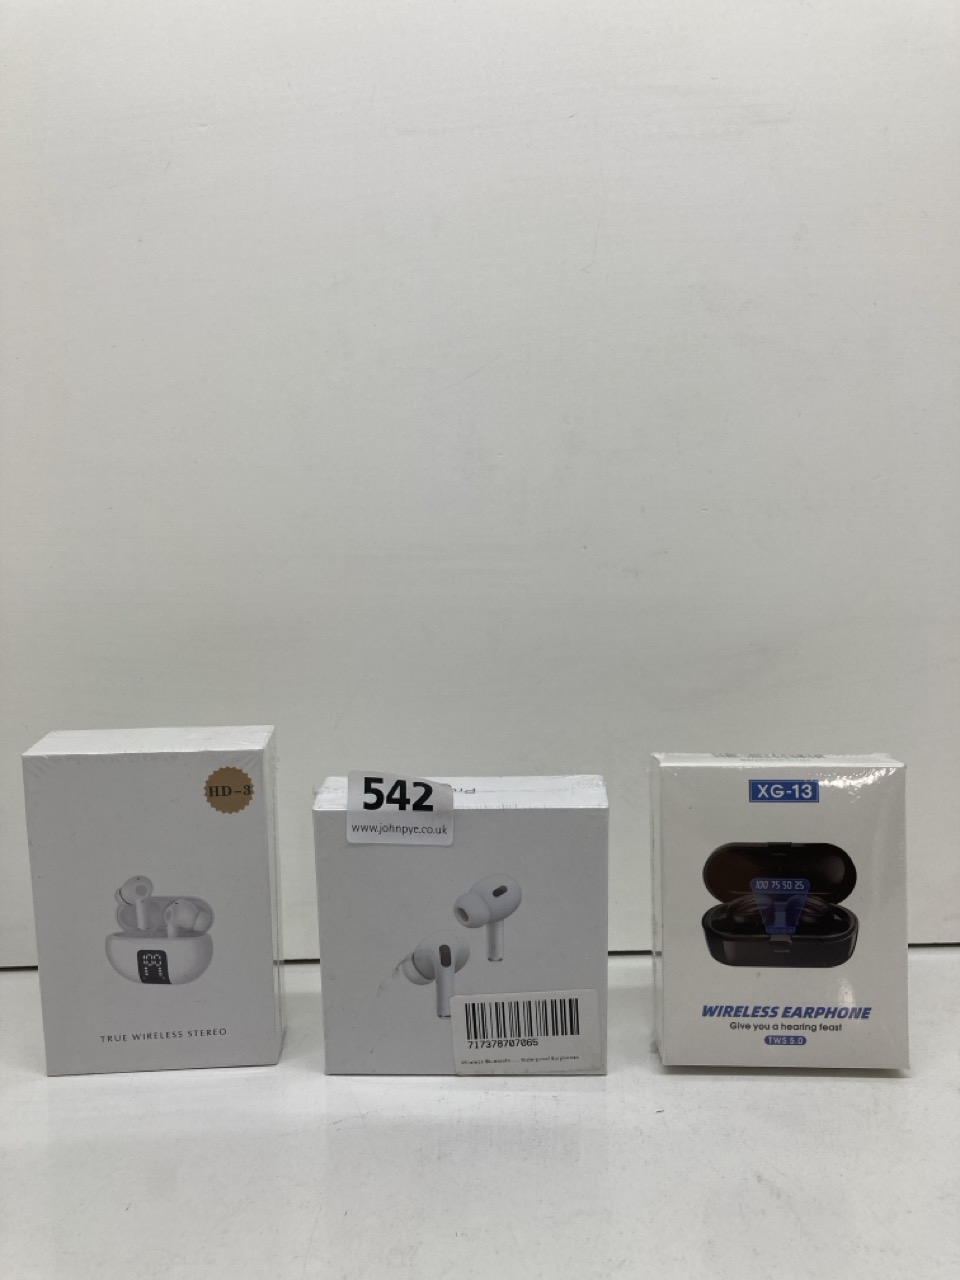 A QTY OF WIRELESS EARPHONES TO INCLUDE XG-13